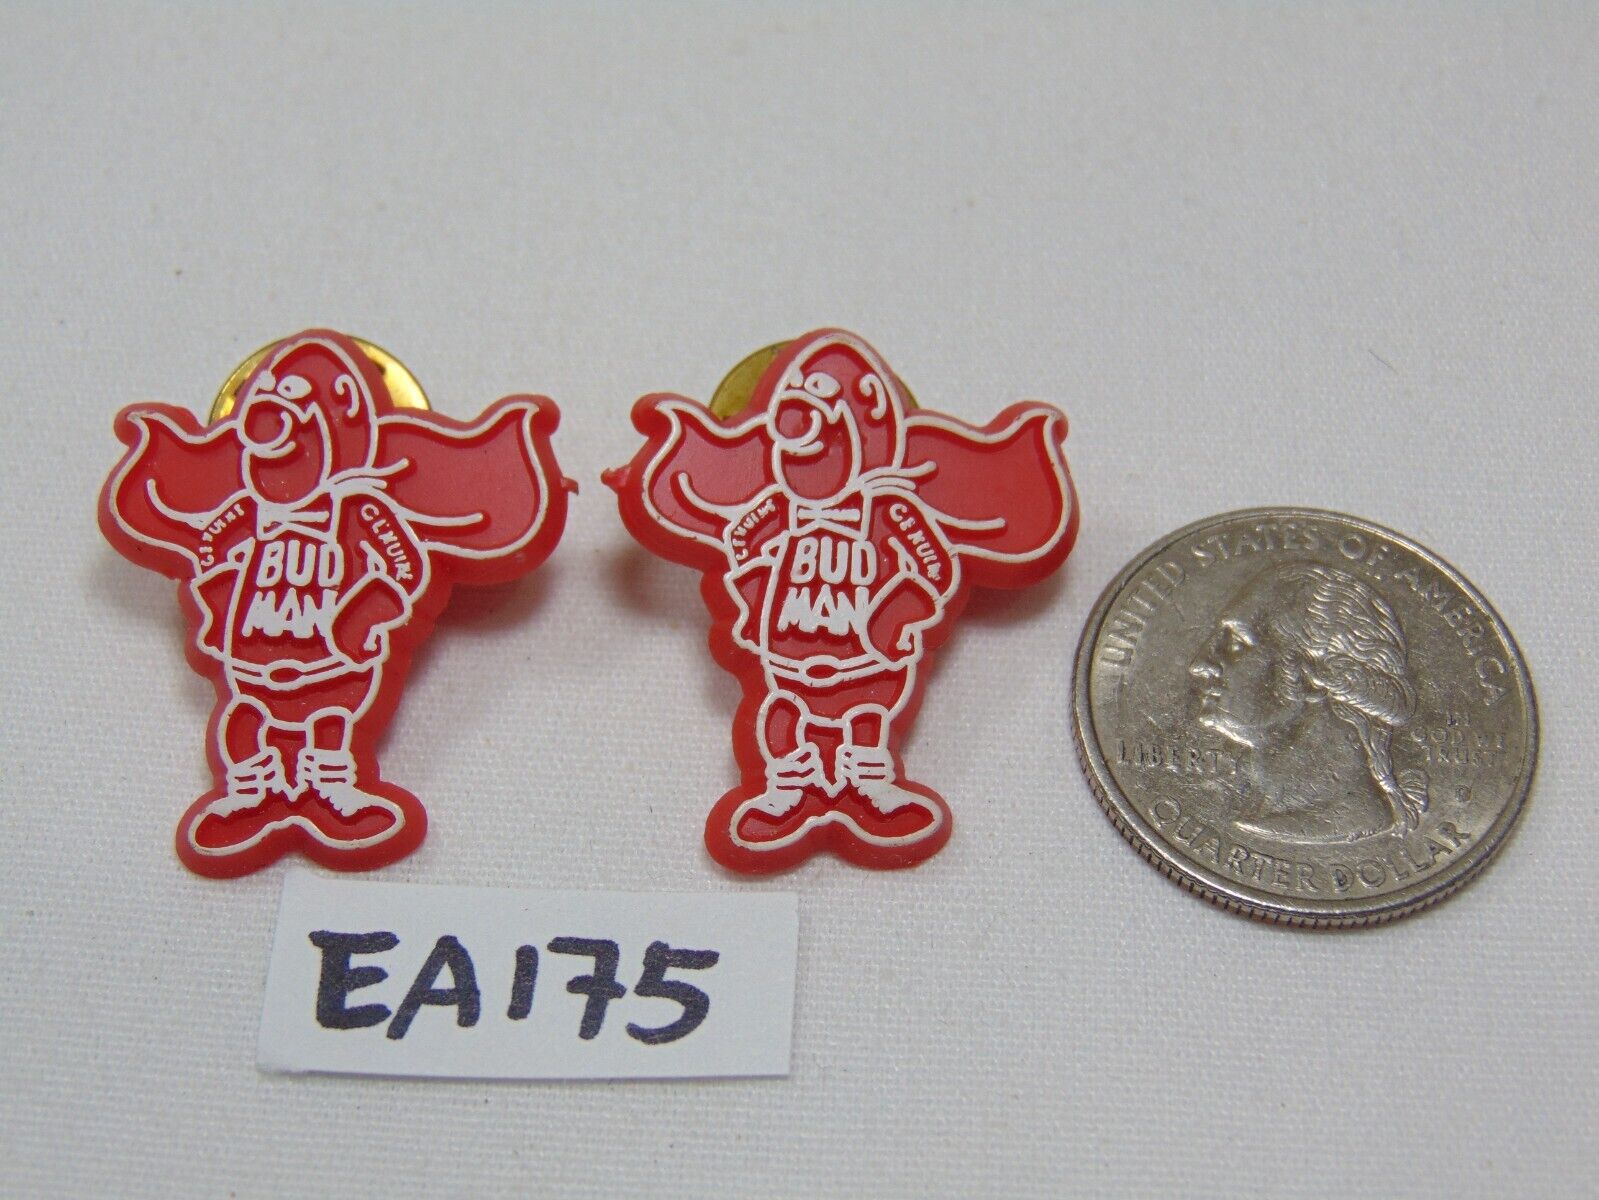 2 Bud Man Budweiser Beer Vintage Lapel Pin Red Plastic Lot of 2 Busch